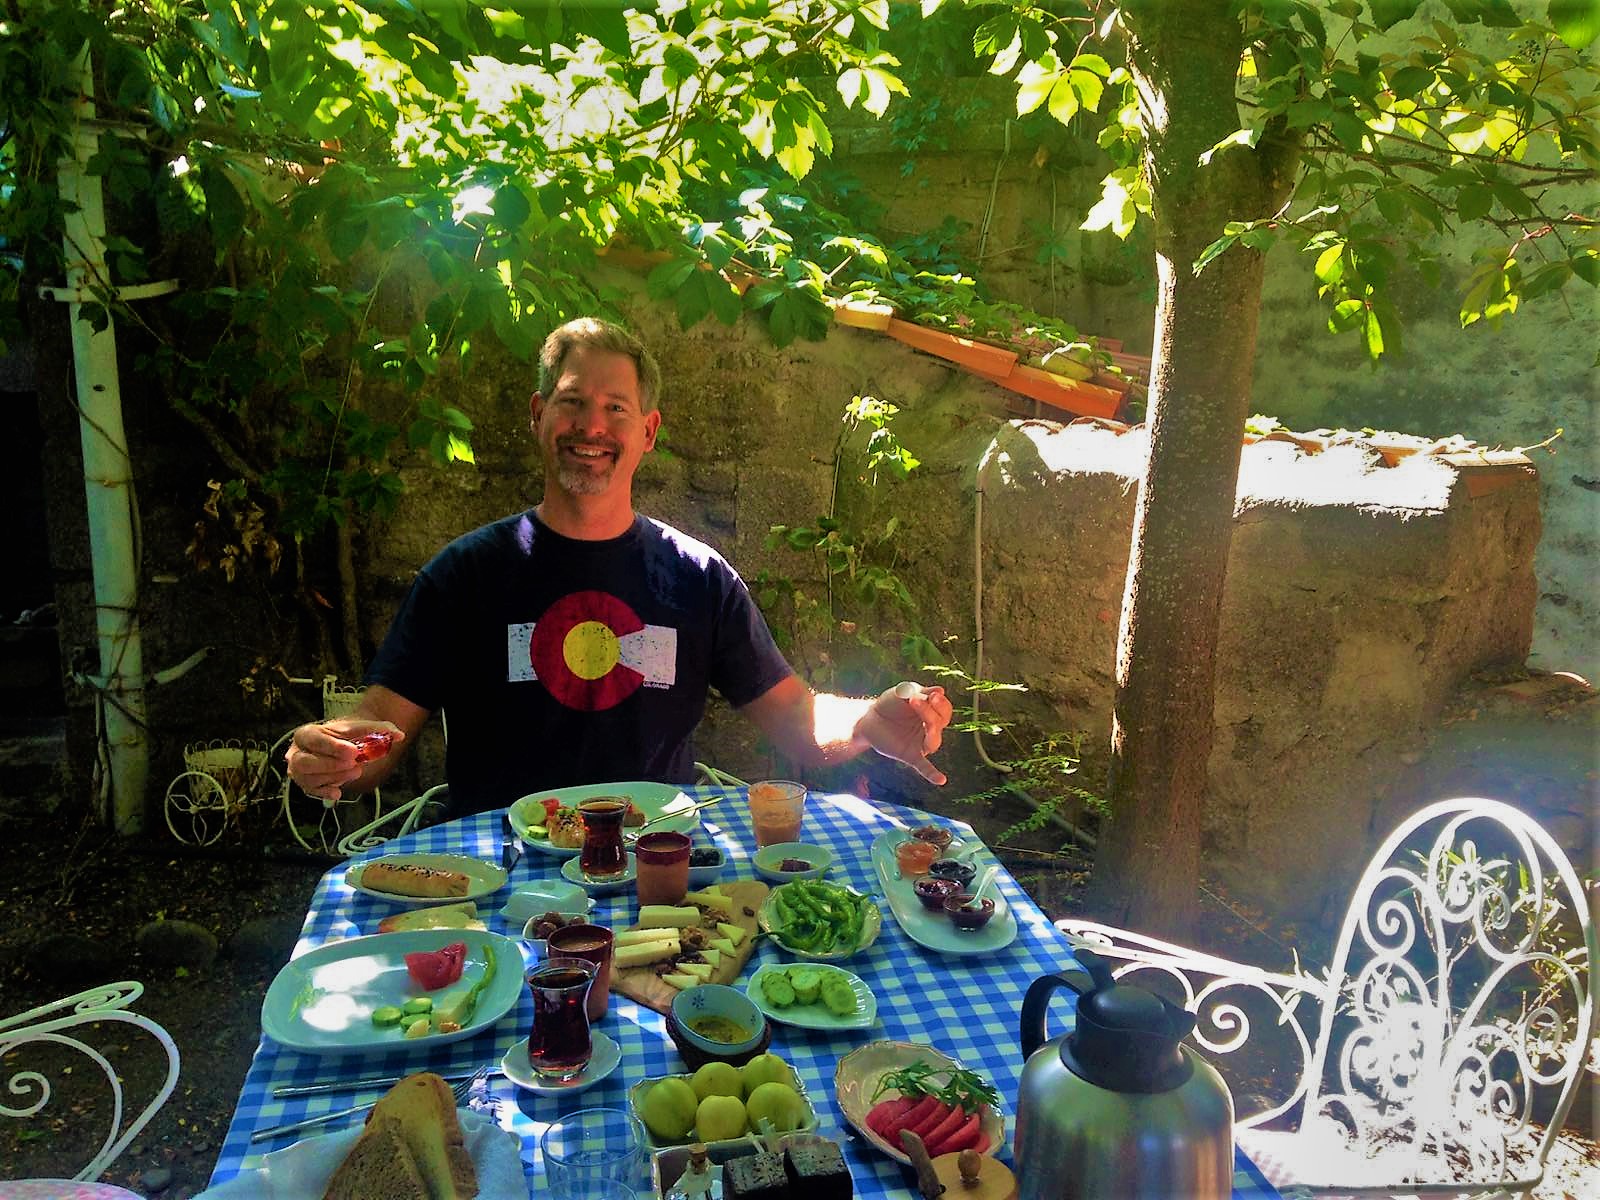 Have you ever had a Turkish Breakfast?